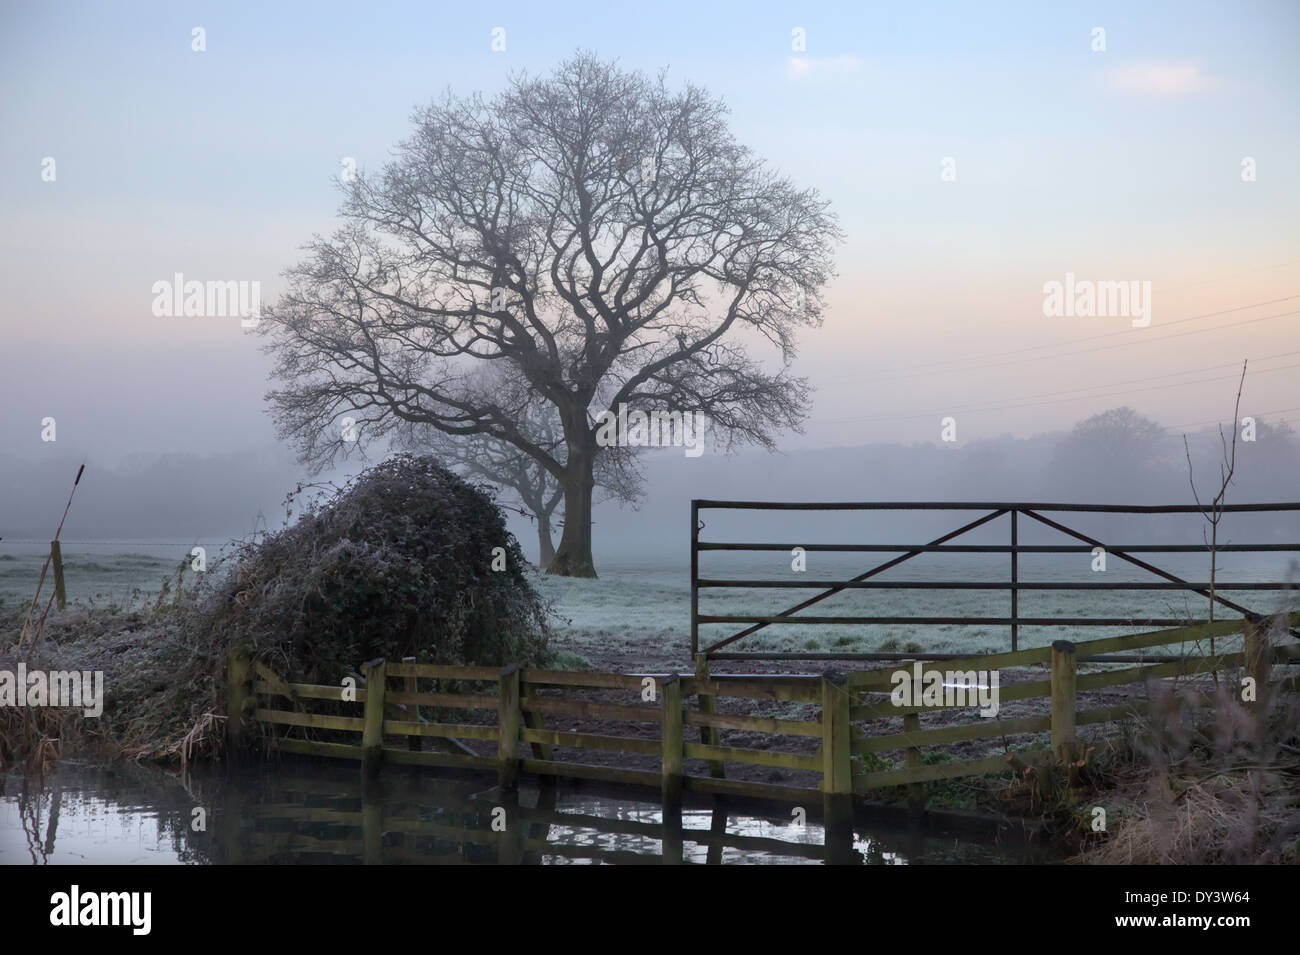 A frosty January early morning on the Grand Western Canal, Burlescombe, Devon Stock Photo